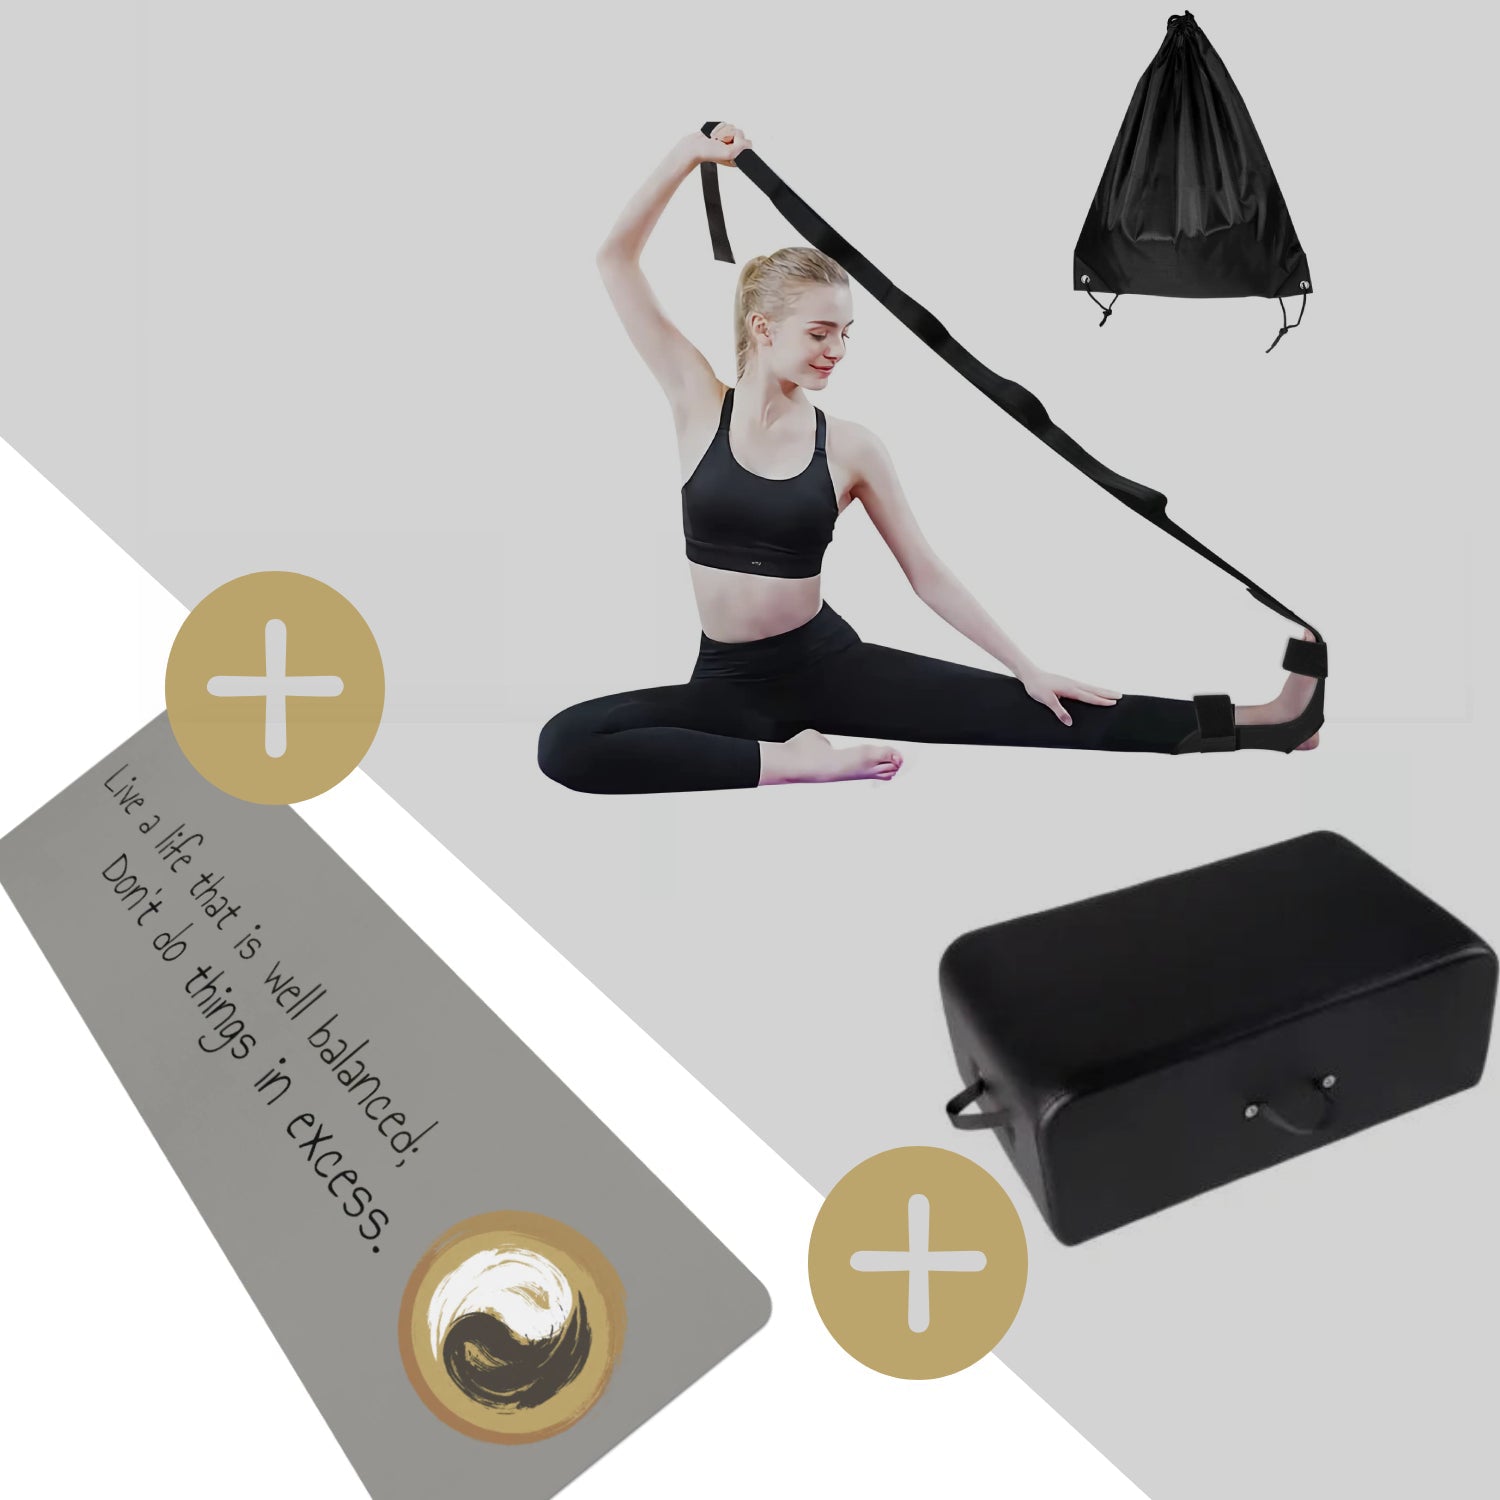 Pilates Aluminum Yoga Bed Yoga and Meditation Supplies in the US